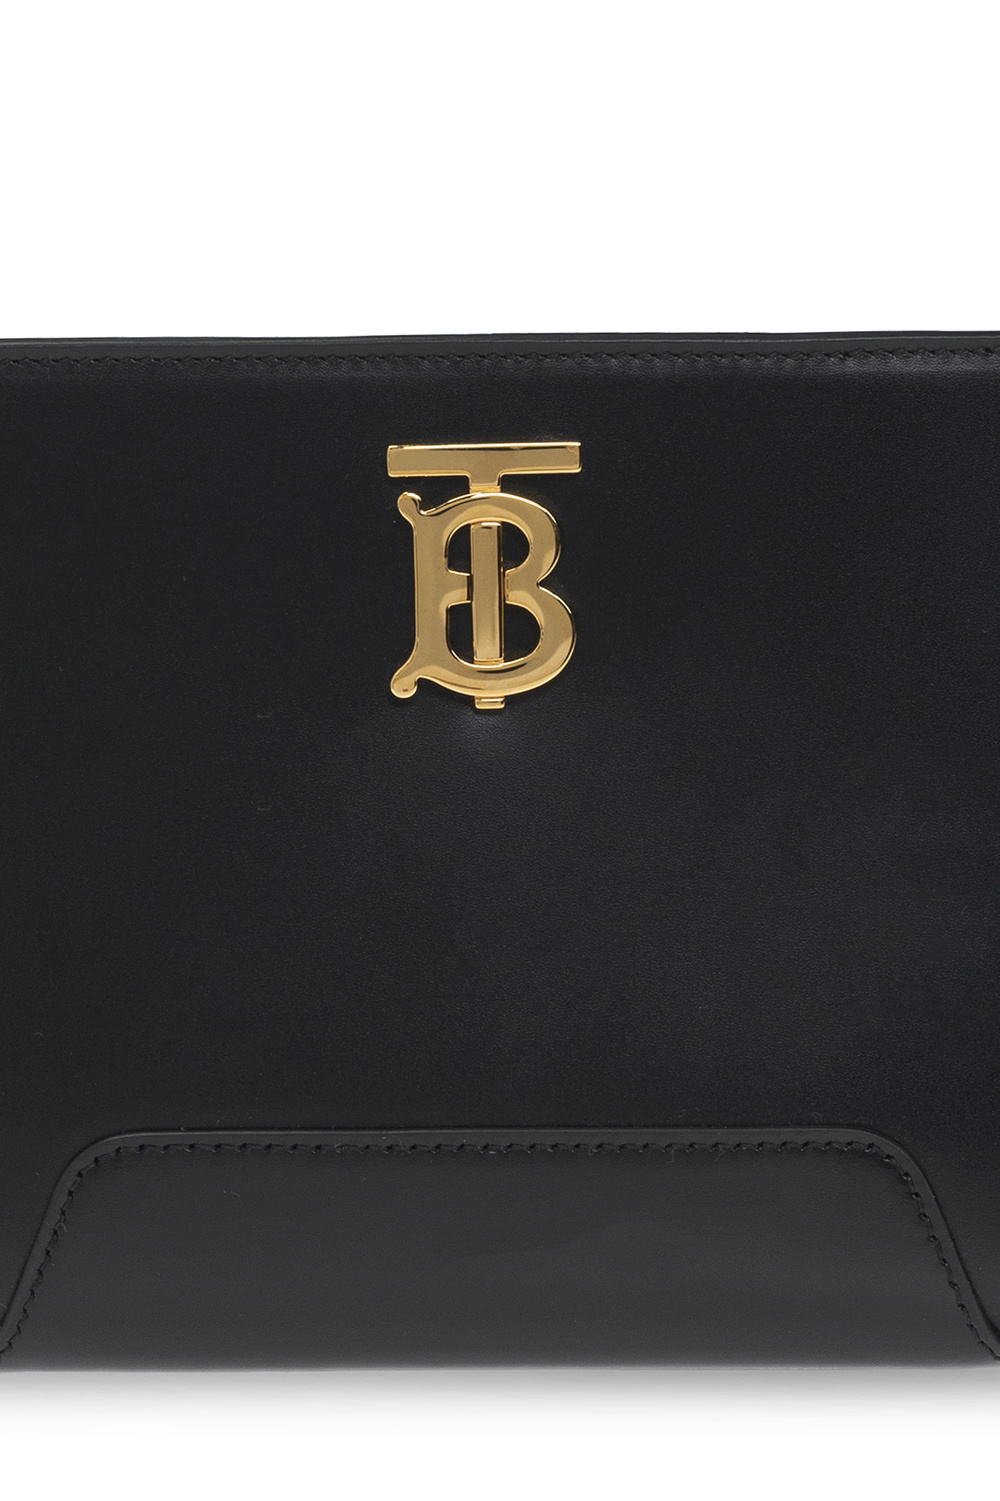 Burberry Grainy Leather TB Card Case Black/Silver-tone